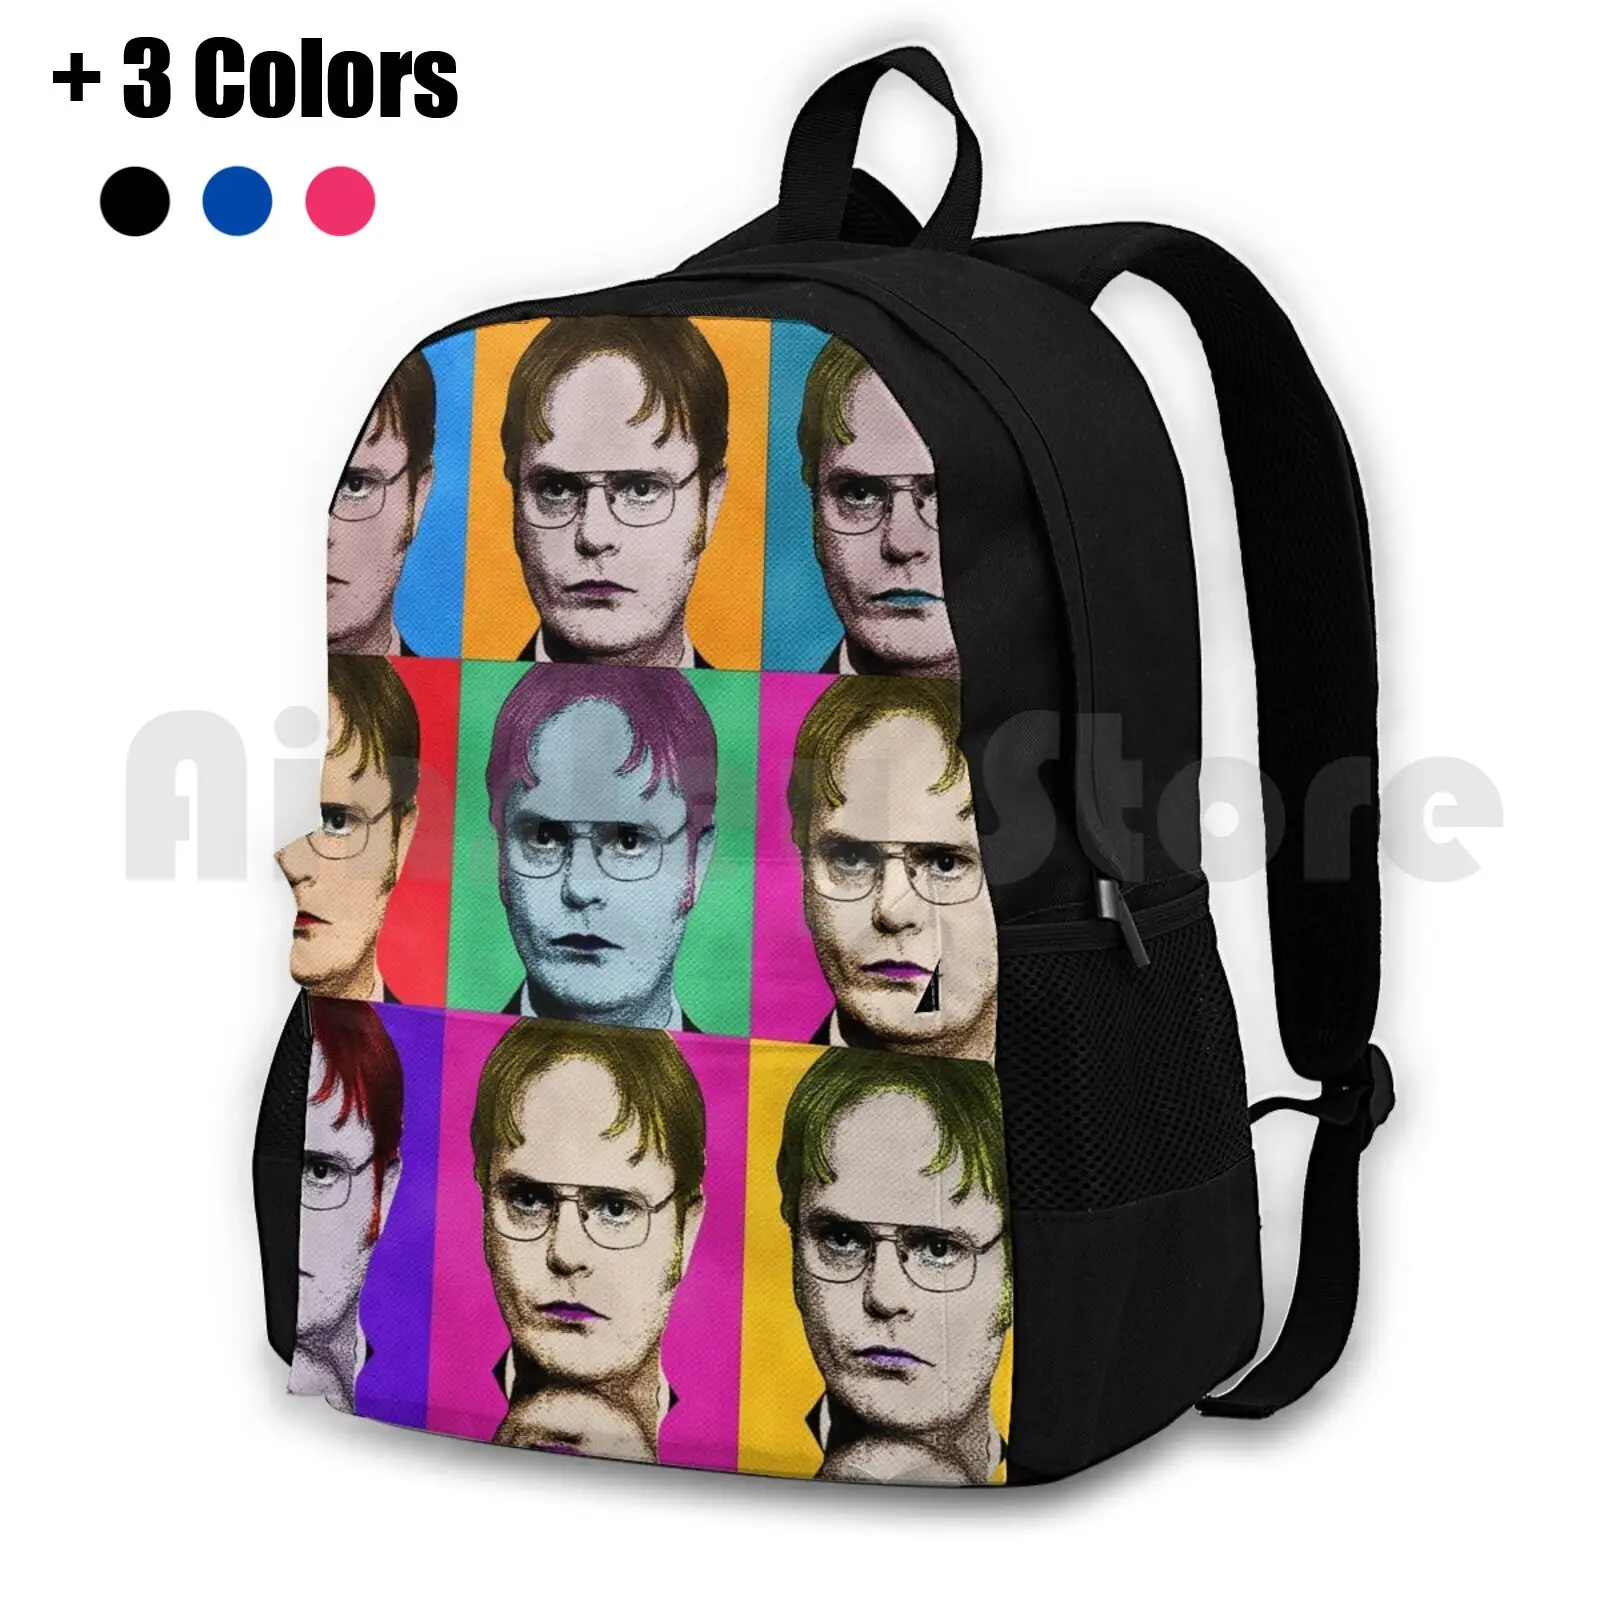 

Dwight Schrute Diptych Outdoor Hiking Backpack Waterproof Camping Travel Dwight Schrute The Office Office Sitcom The Office Us